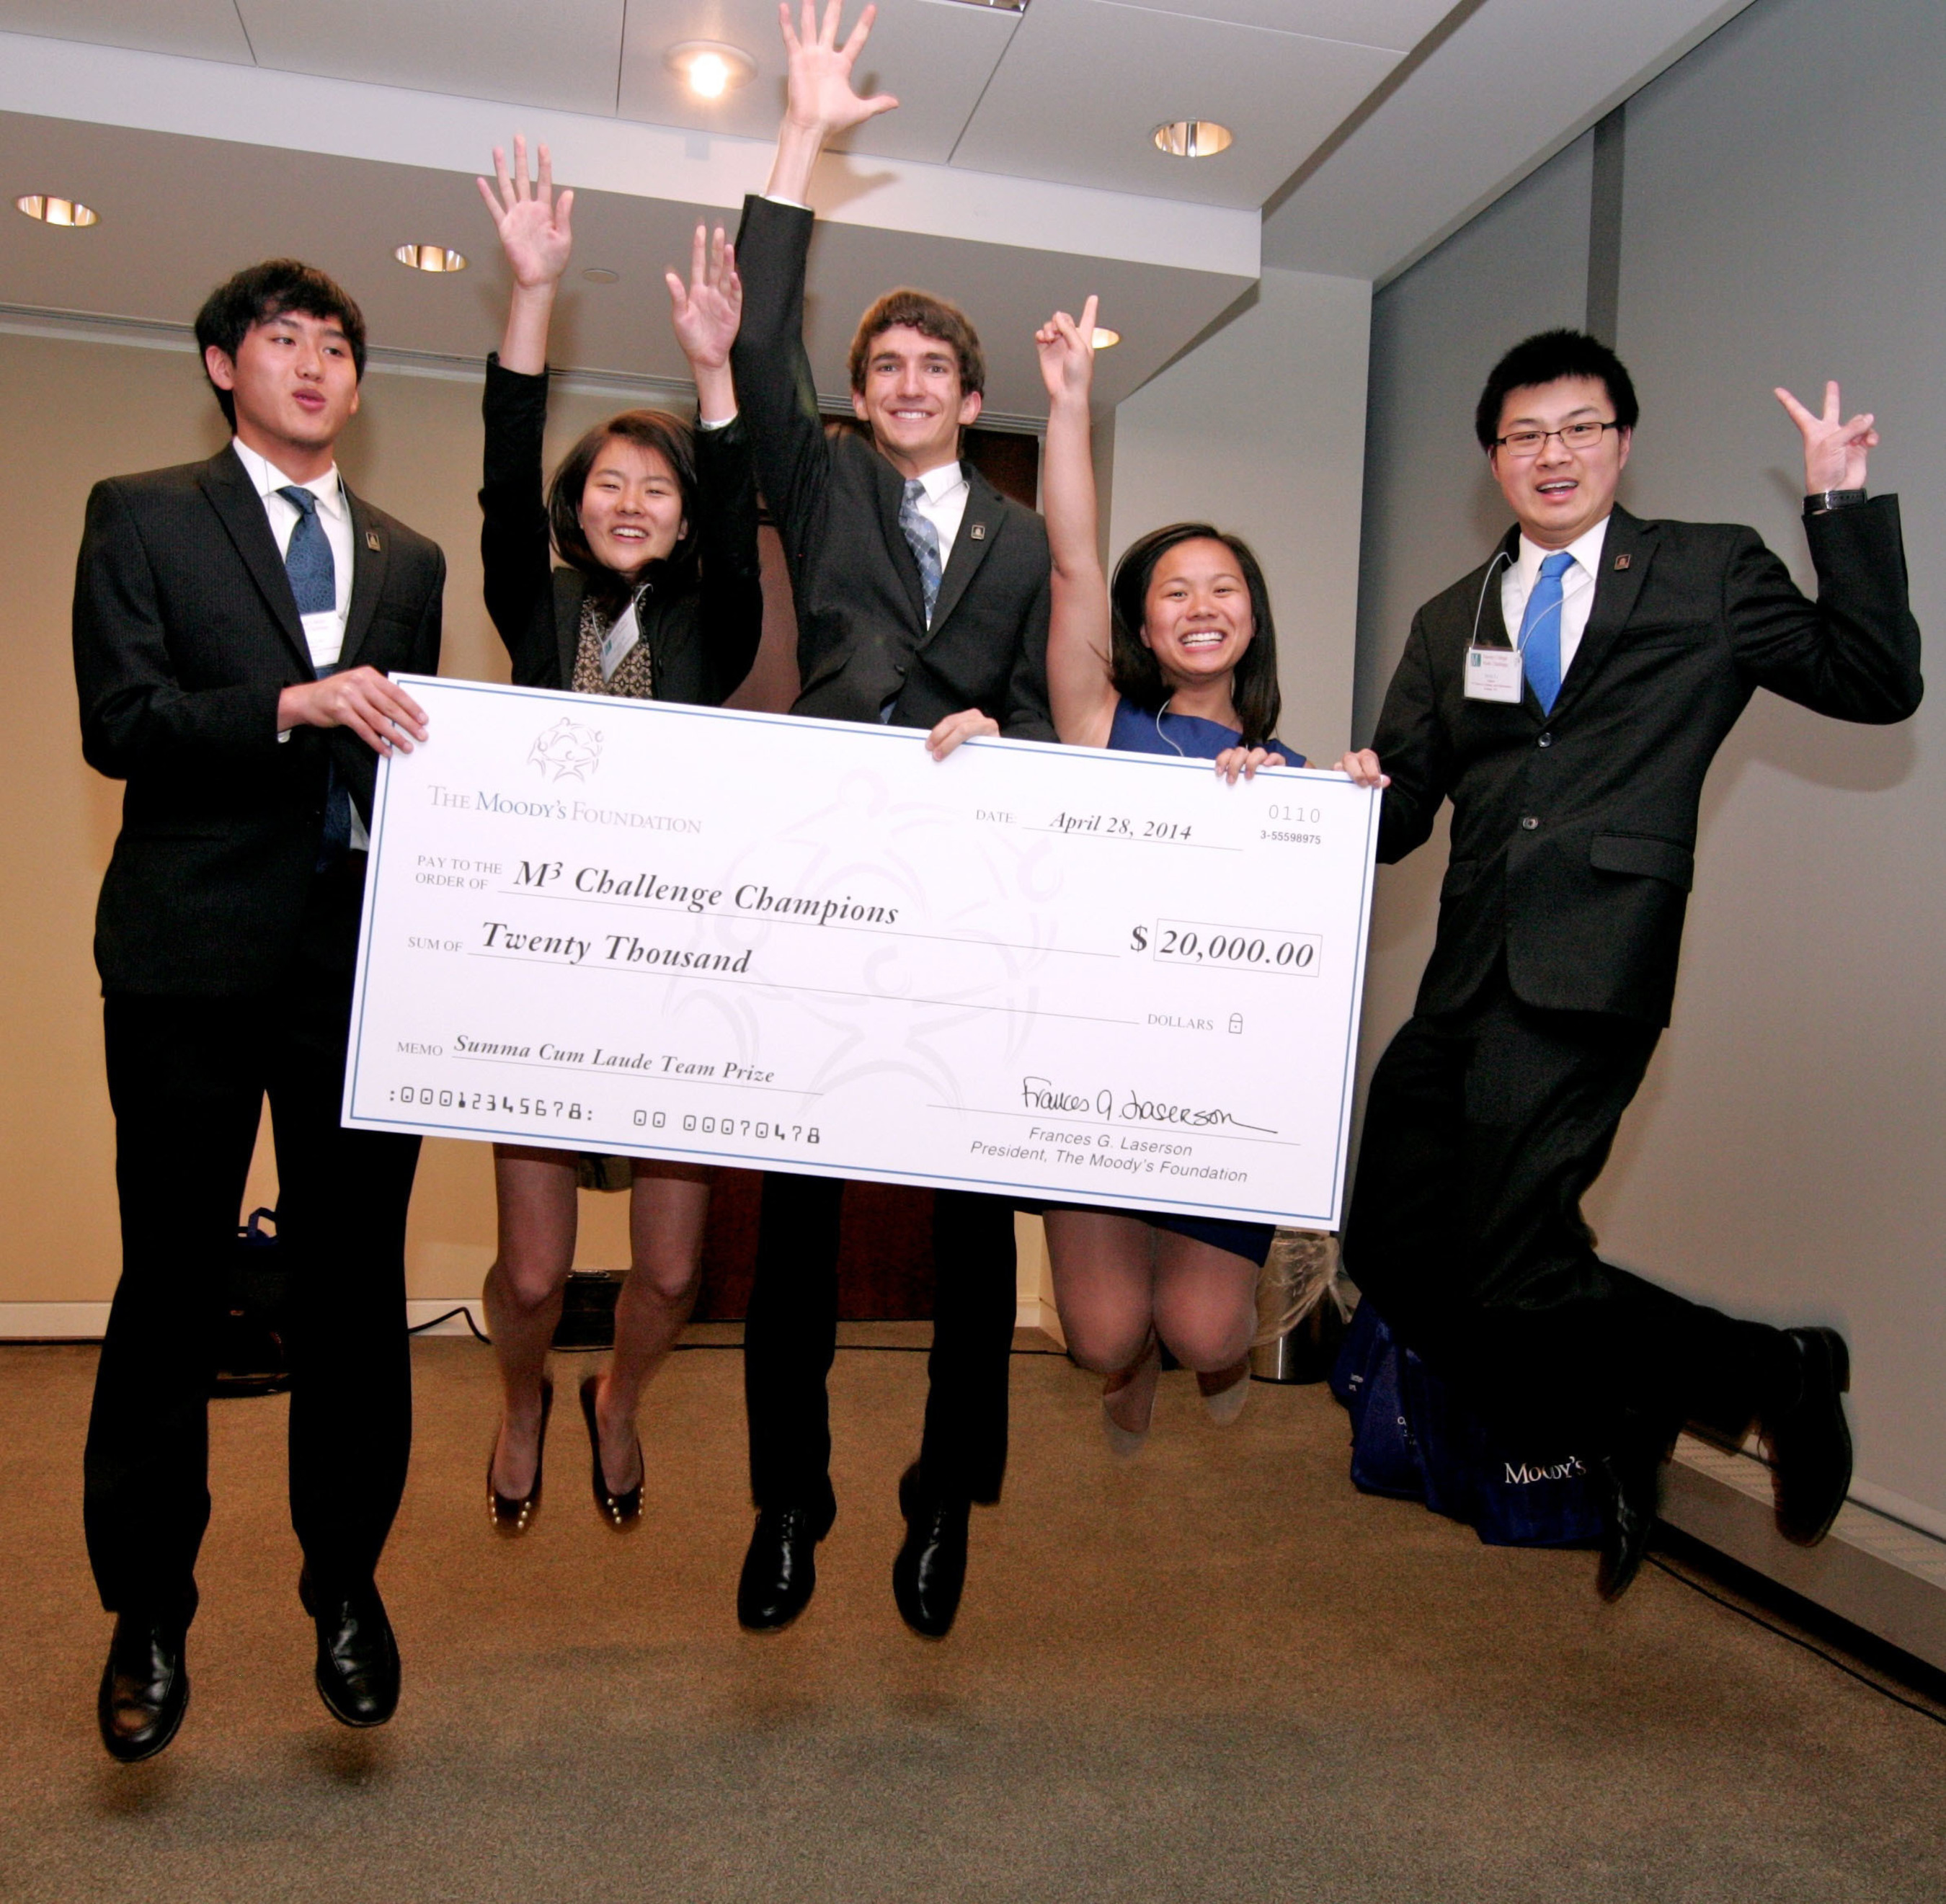 Students from North Carolina School of Science and Mathematics celebrate after being named the 2014 Moody's Mega Math Challenge Champions. From Left to Right: Steven Liao, Jennifer Wu, Zack Polizzi, Anne Lee, Irwin Li. (PRNewsFoto/SIAM)